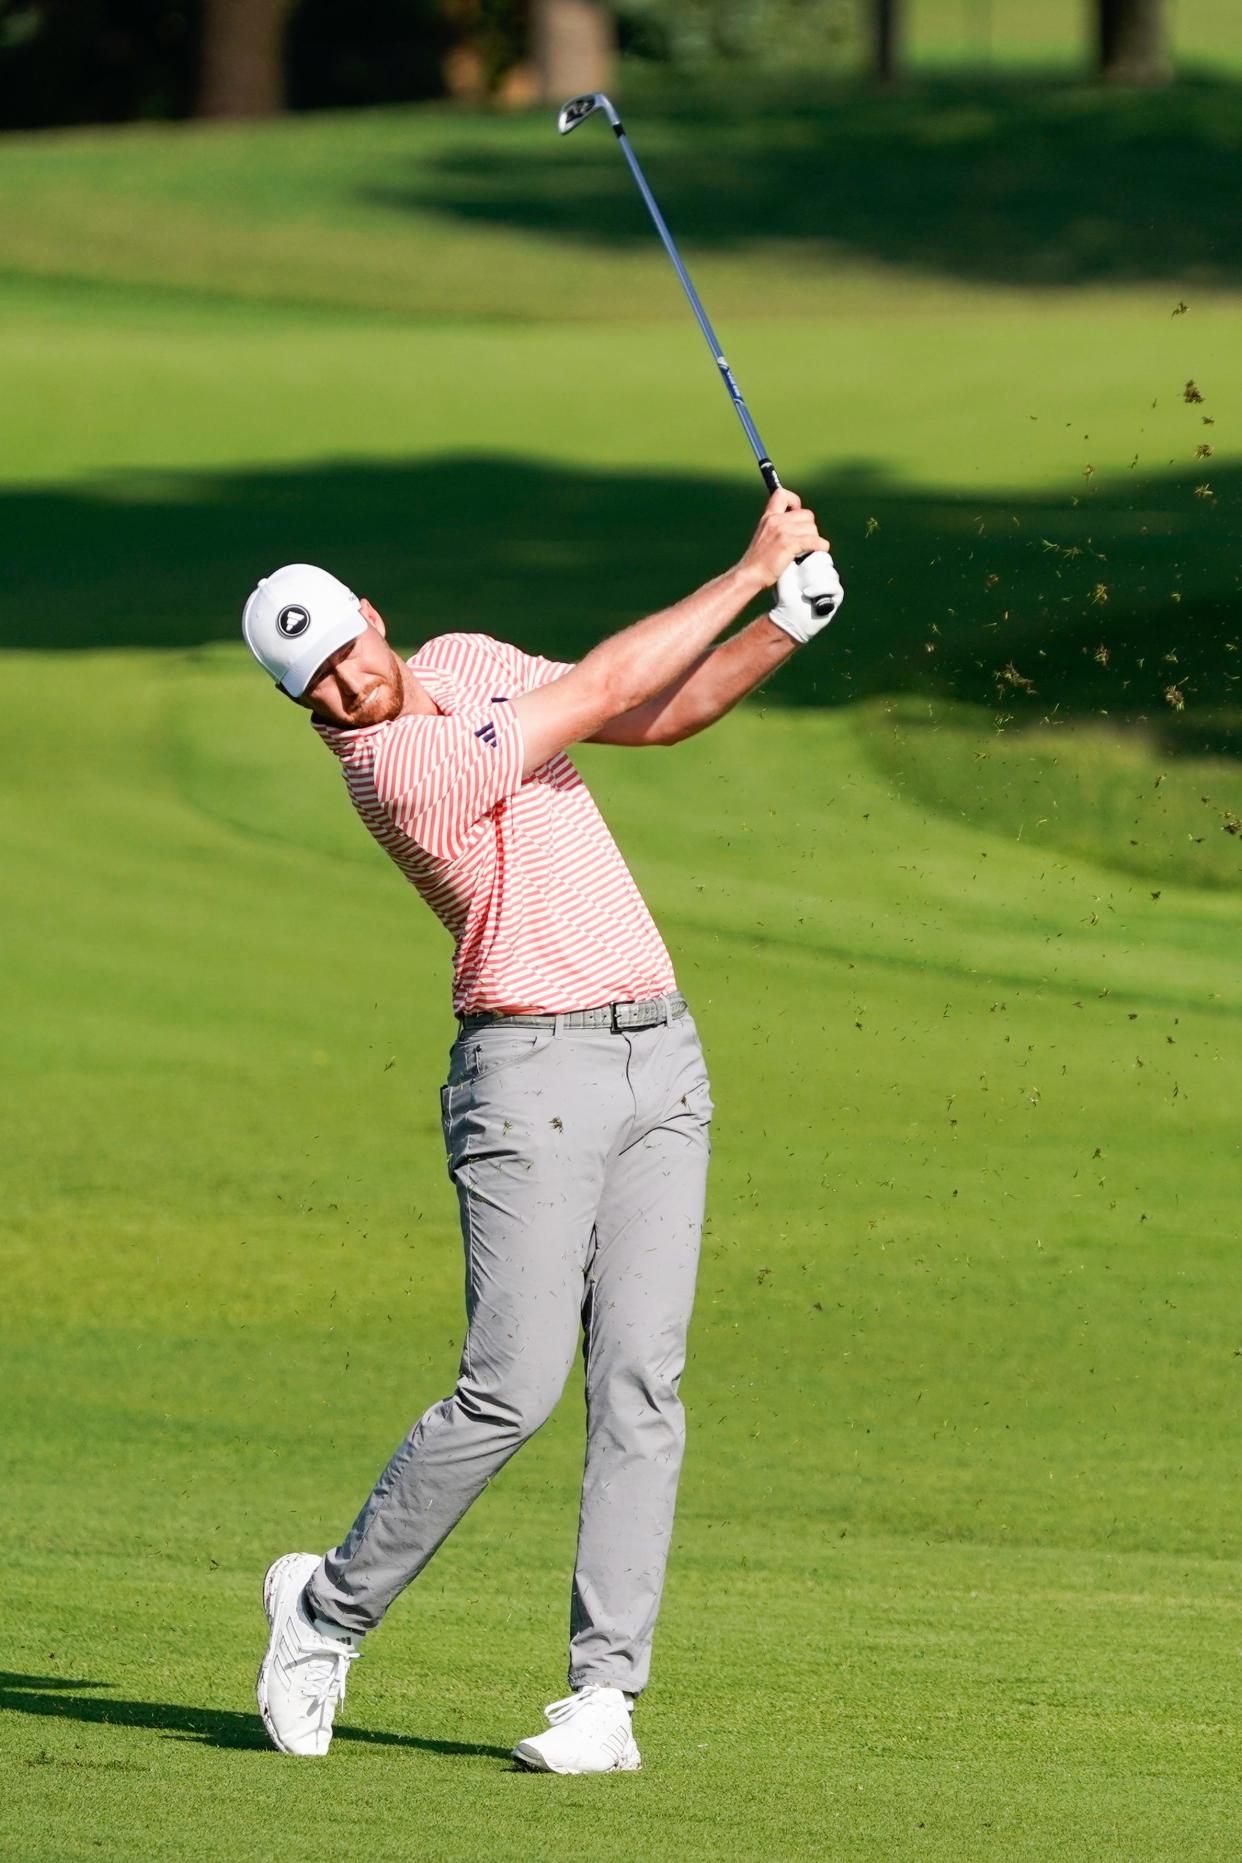 Jupiter's Daniel Berger plays a shot on the 12th hole during the first round of the CJ Cup Byron Nelson tournament last week but will miss the PGA Tournament because of his back injury.